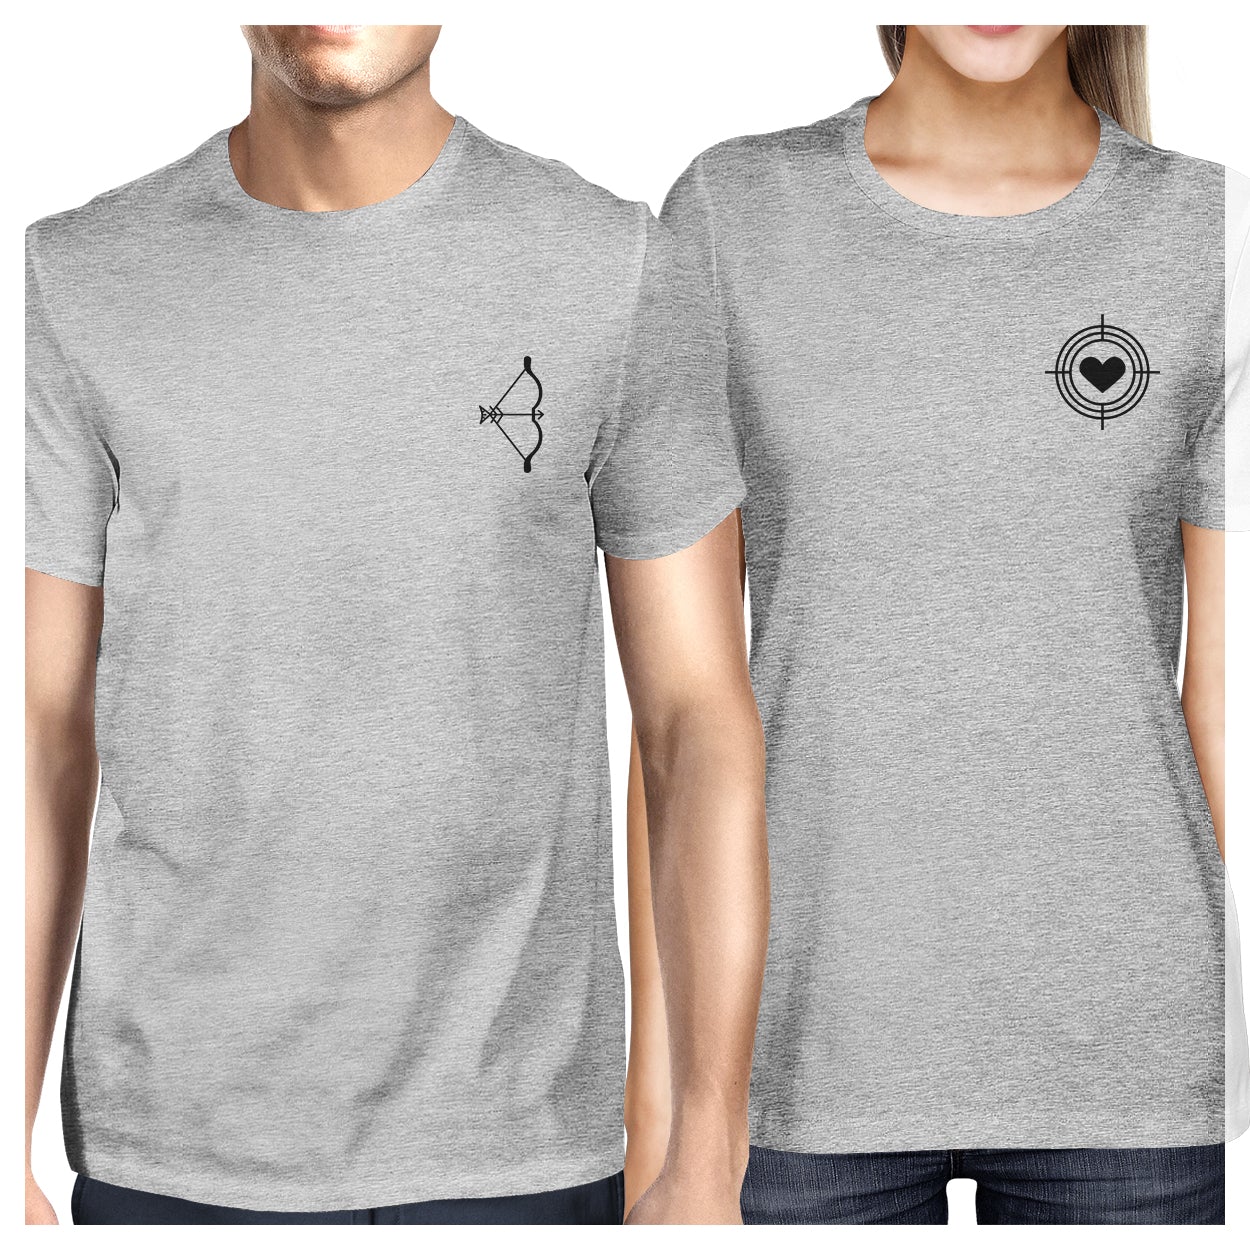 Bow And Arrow To Heart Target Matching Couple Grey Shirts